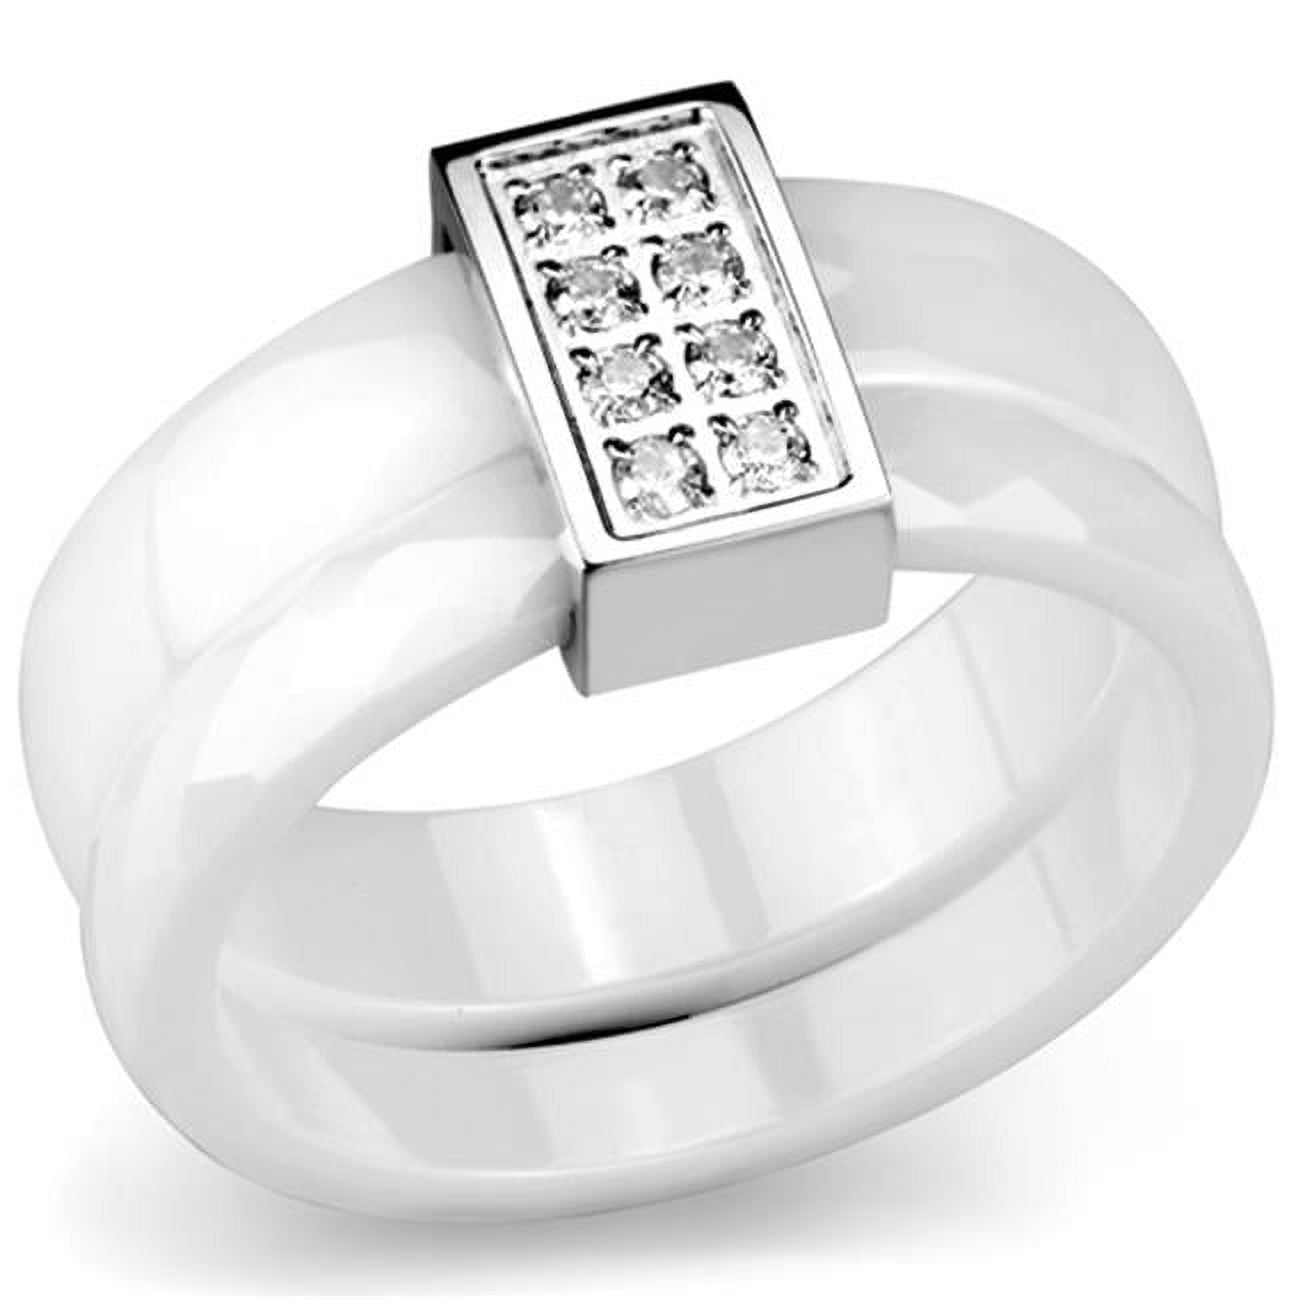 Picture of Alamode 3W979-7 Women High Polished Stainless Steel Ring with Ceramic in White - Size 7